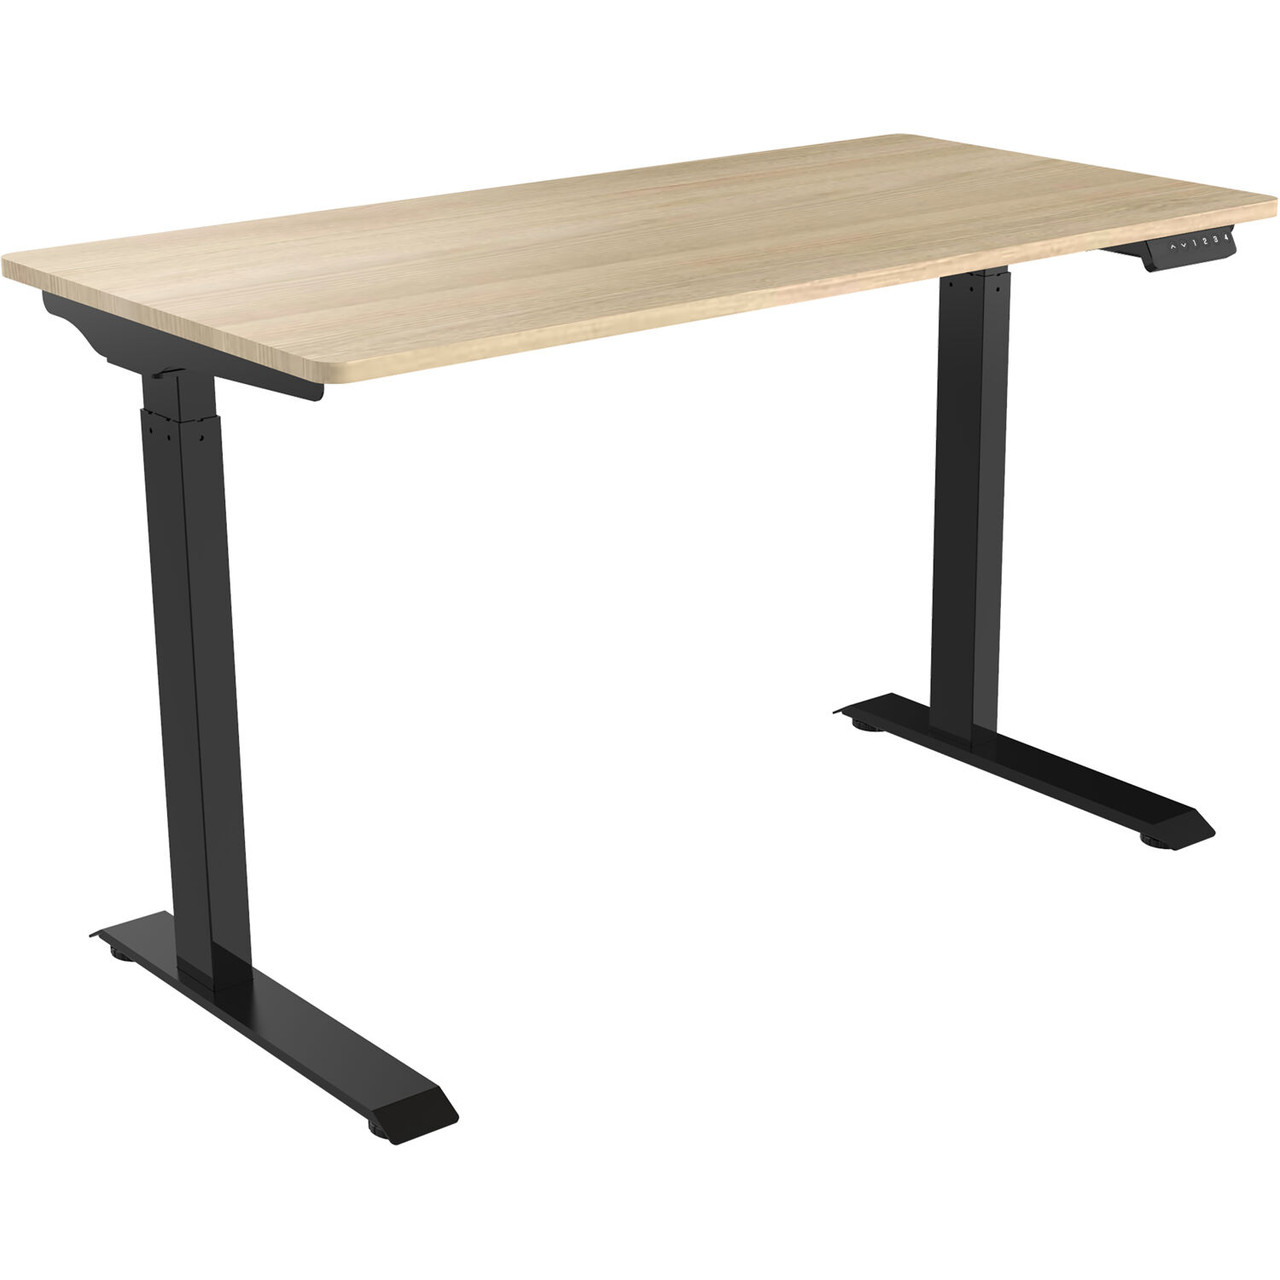 LIKEIN Electric Standing Desk Height Adjustable Desk with